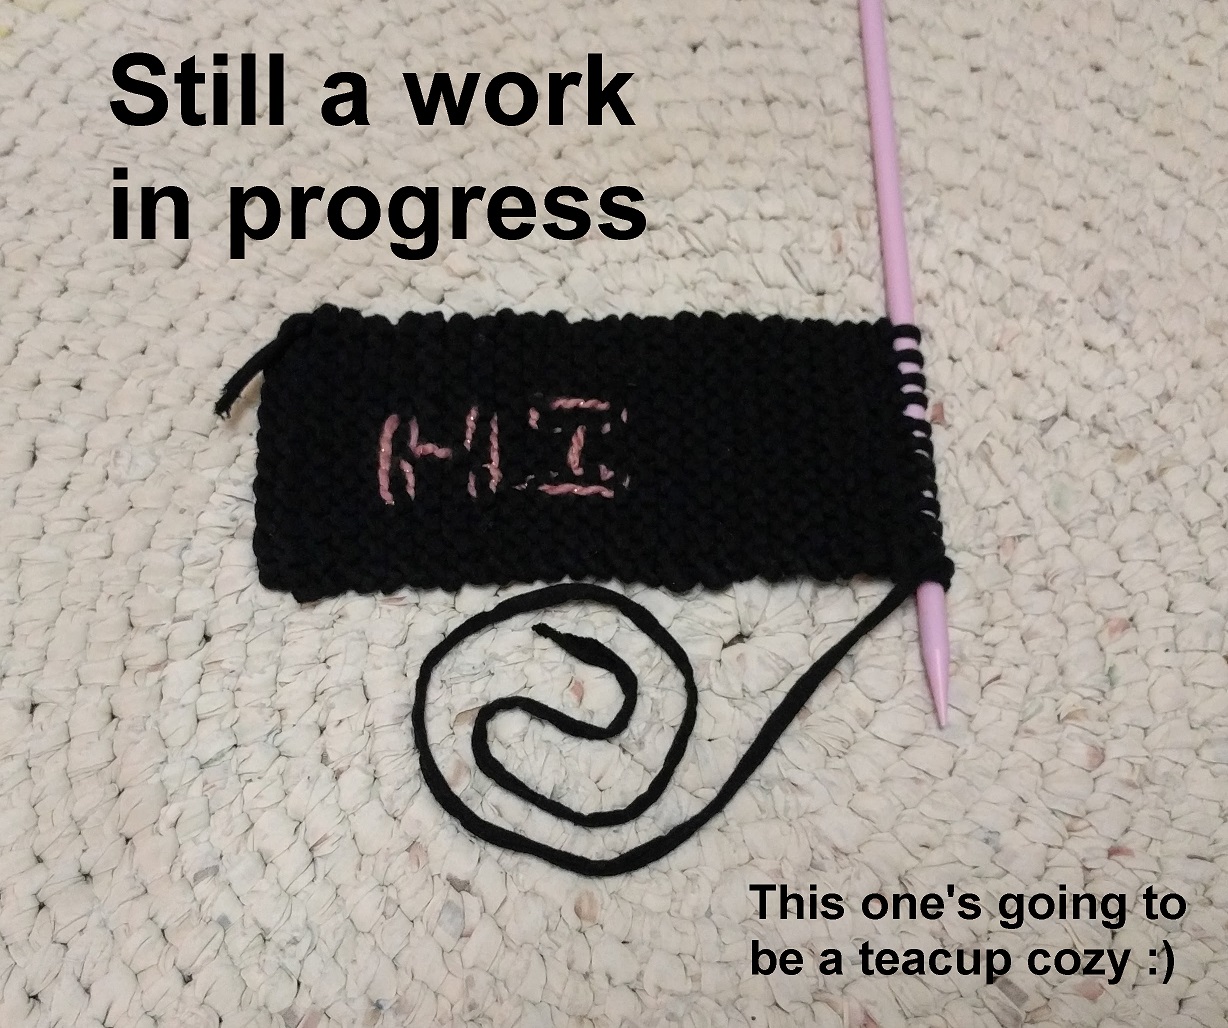 A small knitted rectangle with the word hi lightly sewn into it with pink yarn, and text saying still a work in progress.